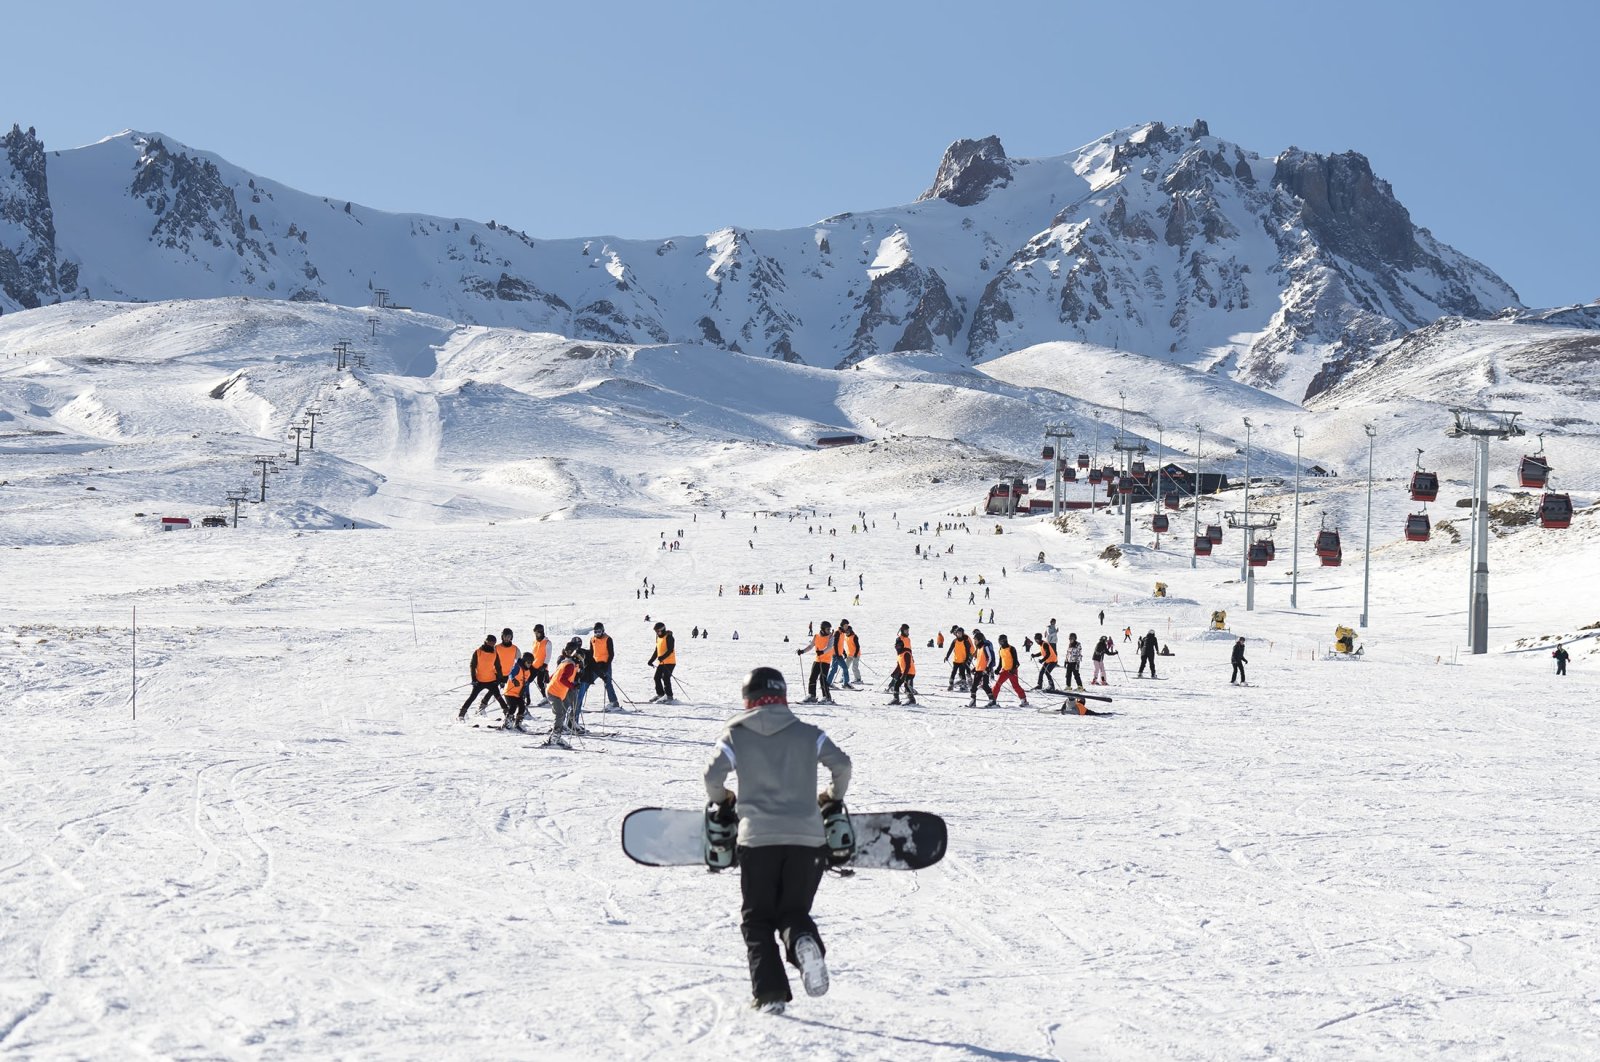 Mount Erciyes is a must-visit for snow sports, in Kayseri, Turkey. (Shutterstock Photo)